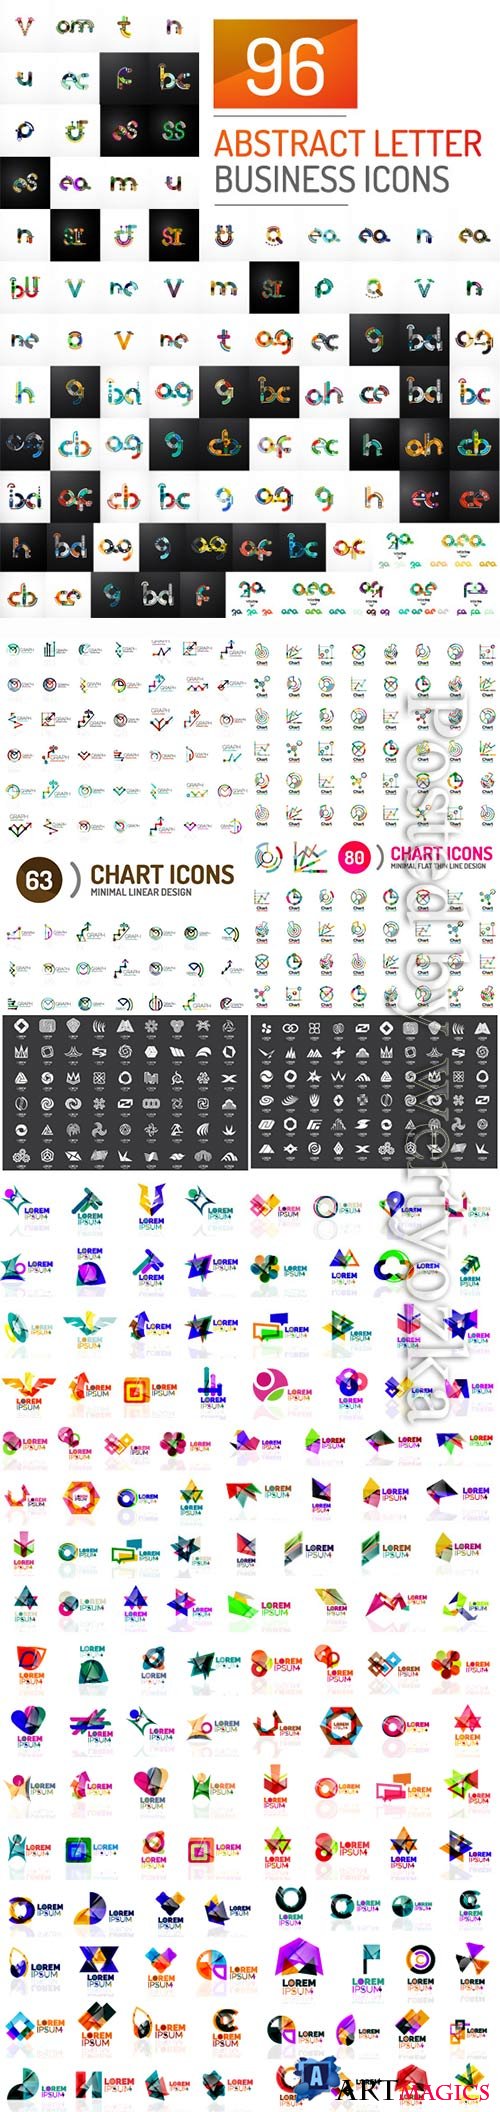 Set of vector logos, icons